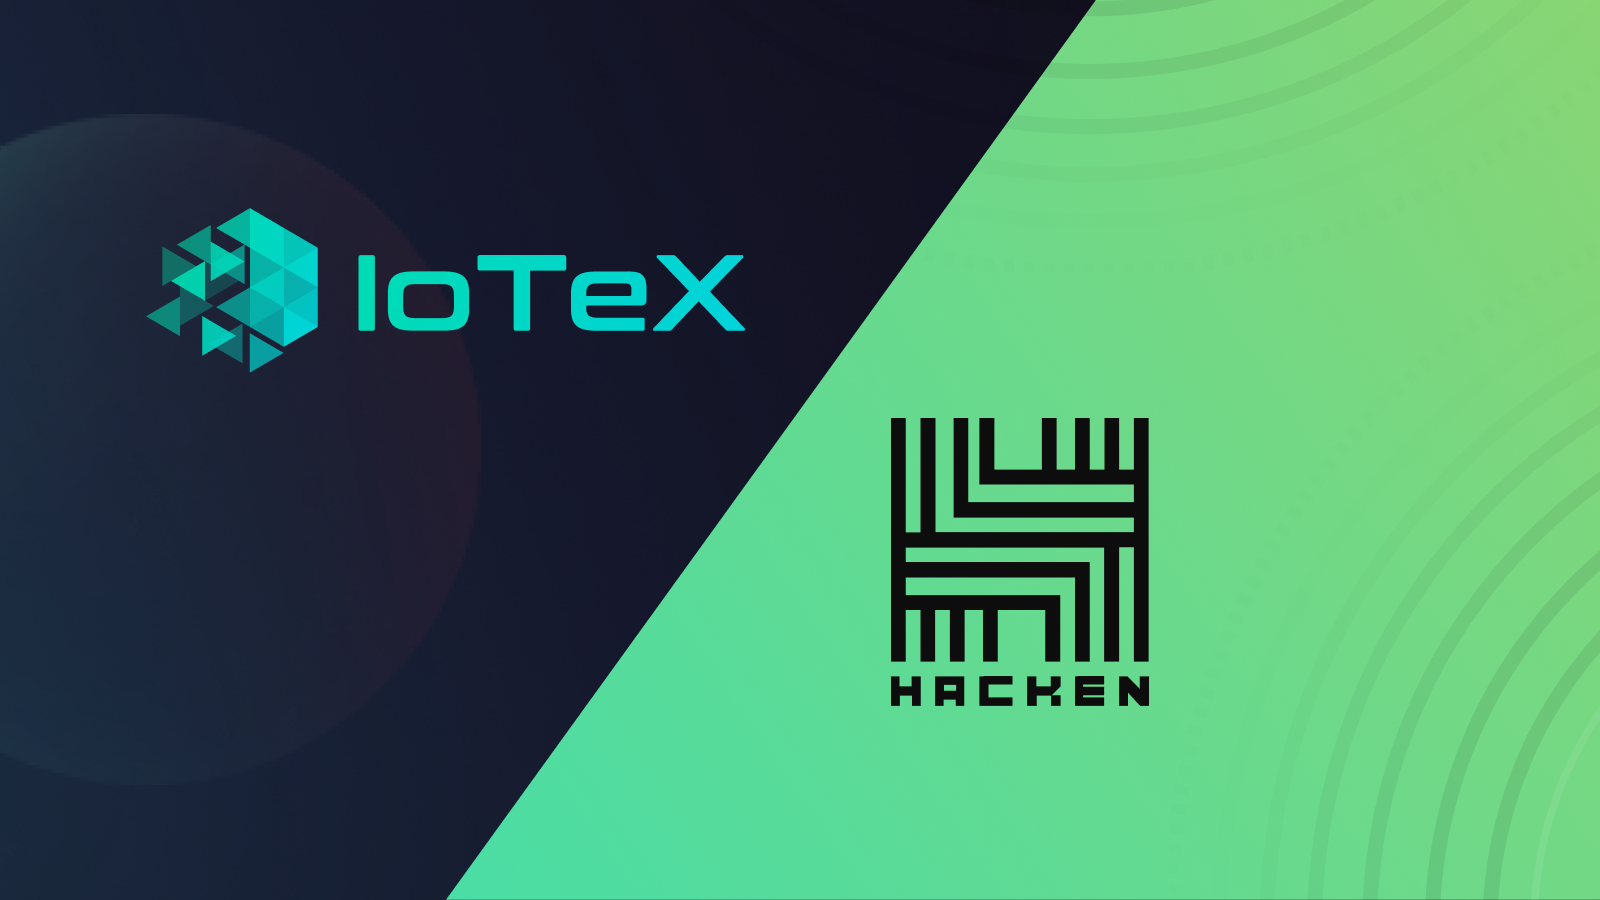 IoTeX x Hacken Partner to Provide Cybersecurity for Ecosystem